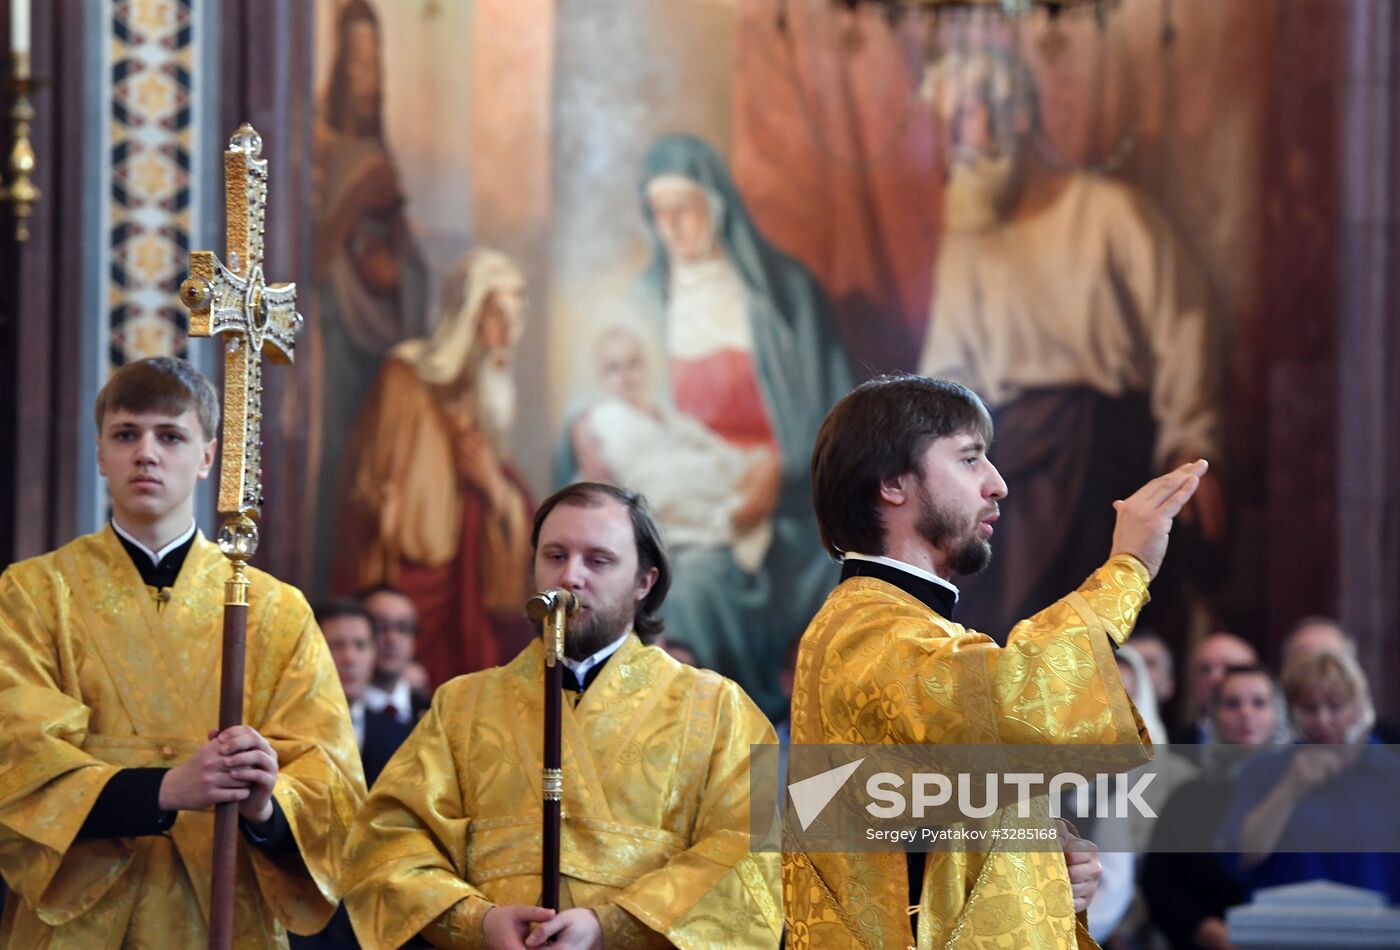 Liturgy to mark enthronement of Patriarch Kirill of Moscow and All Russia